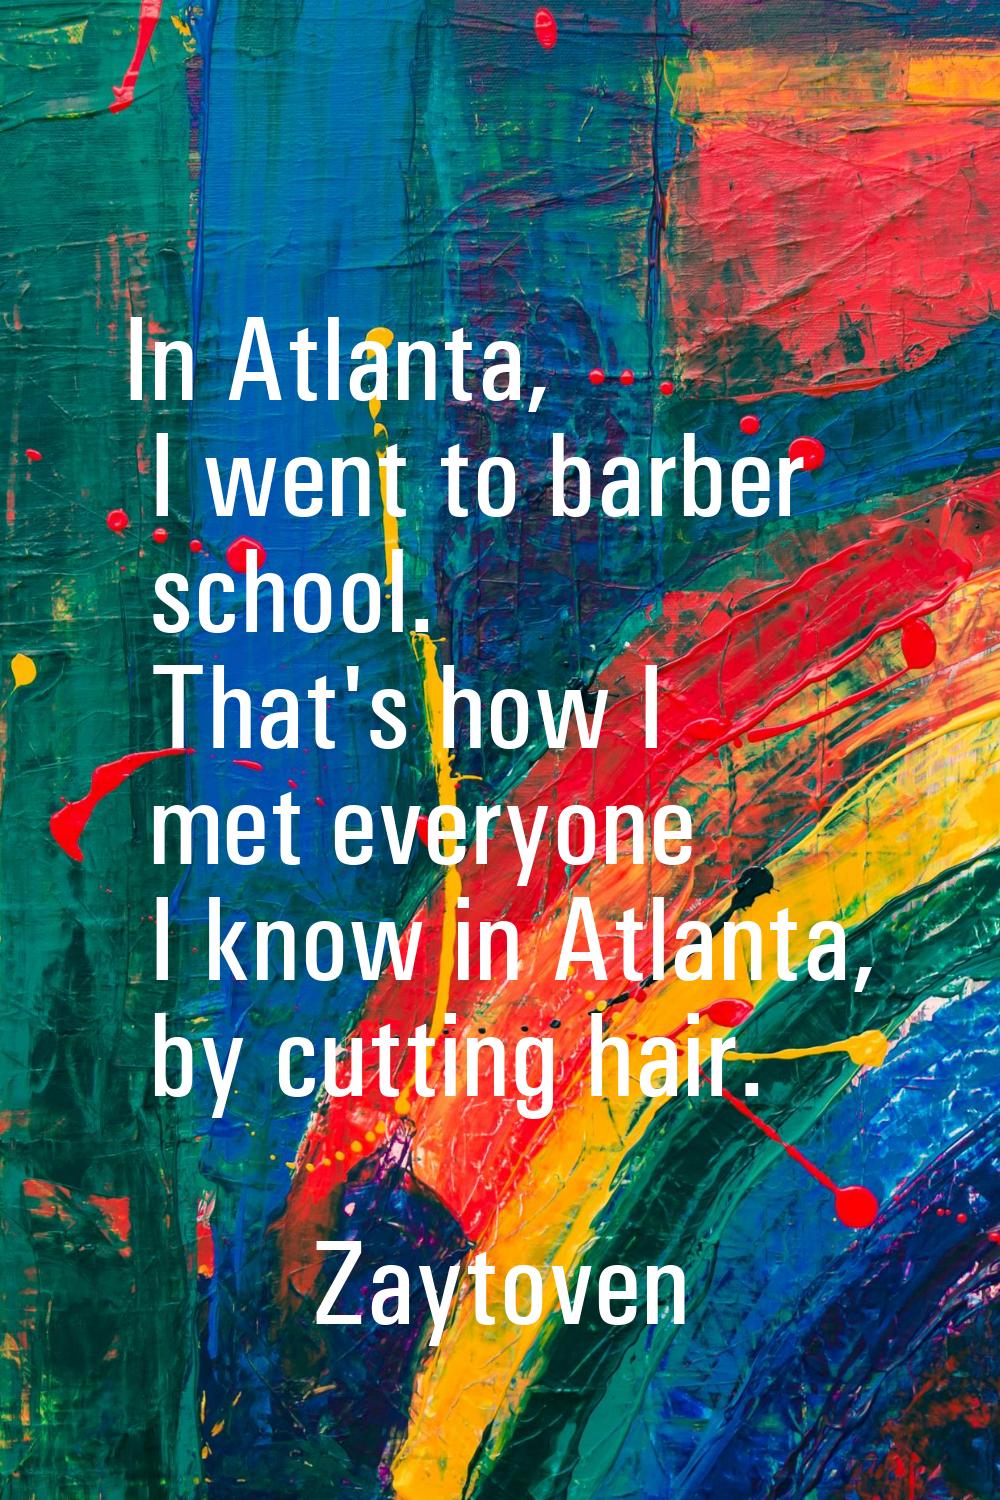 In Atlanta, I went to barber school. That's how I met everyone I know in Atlanta, by cutting hair.